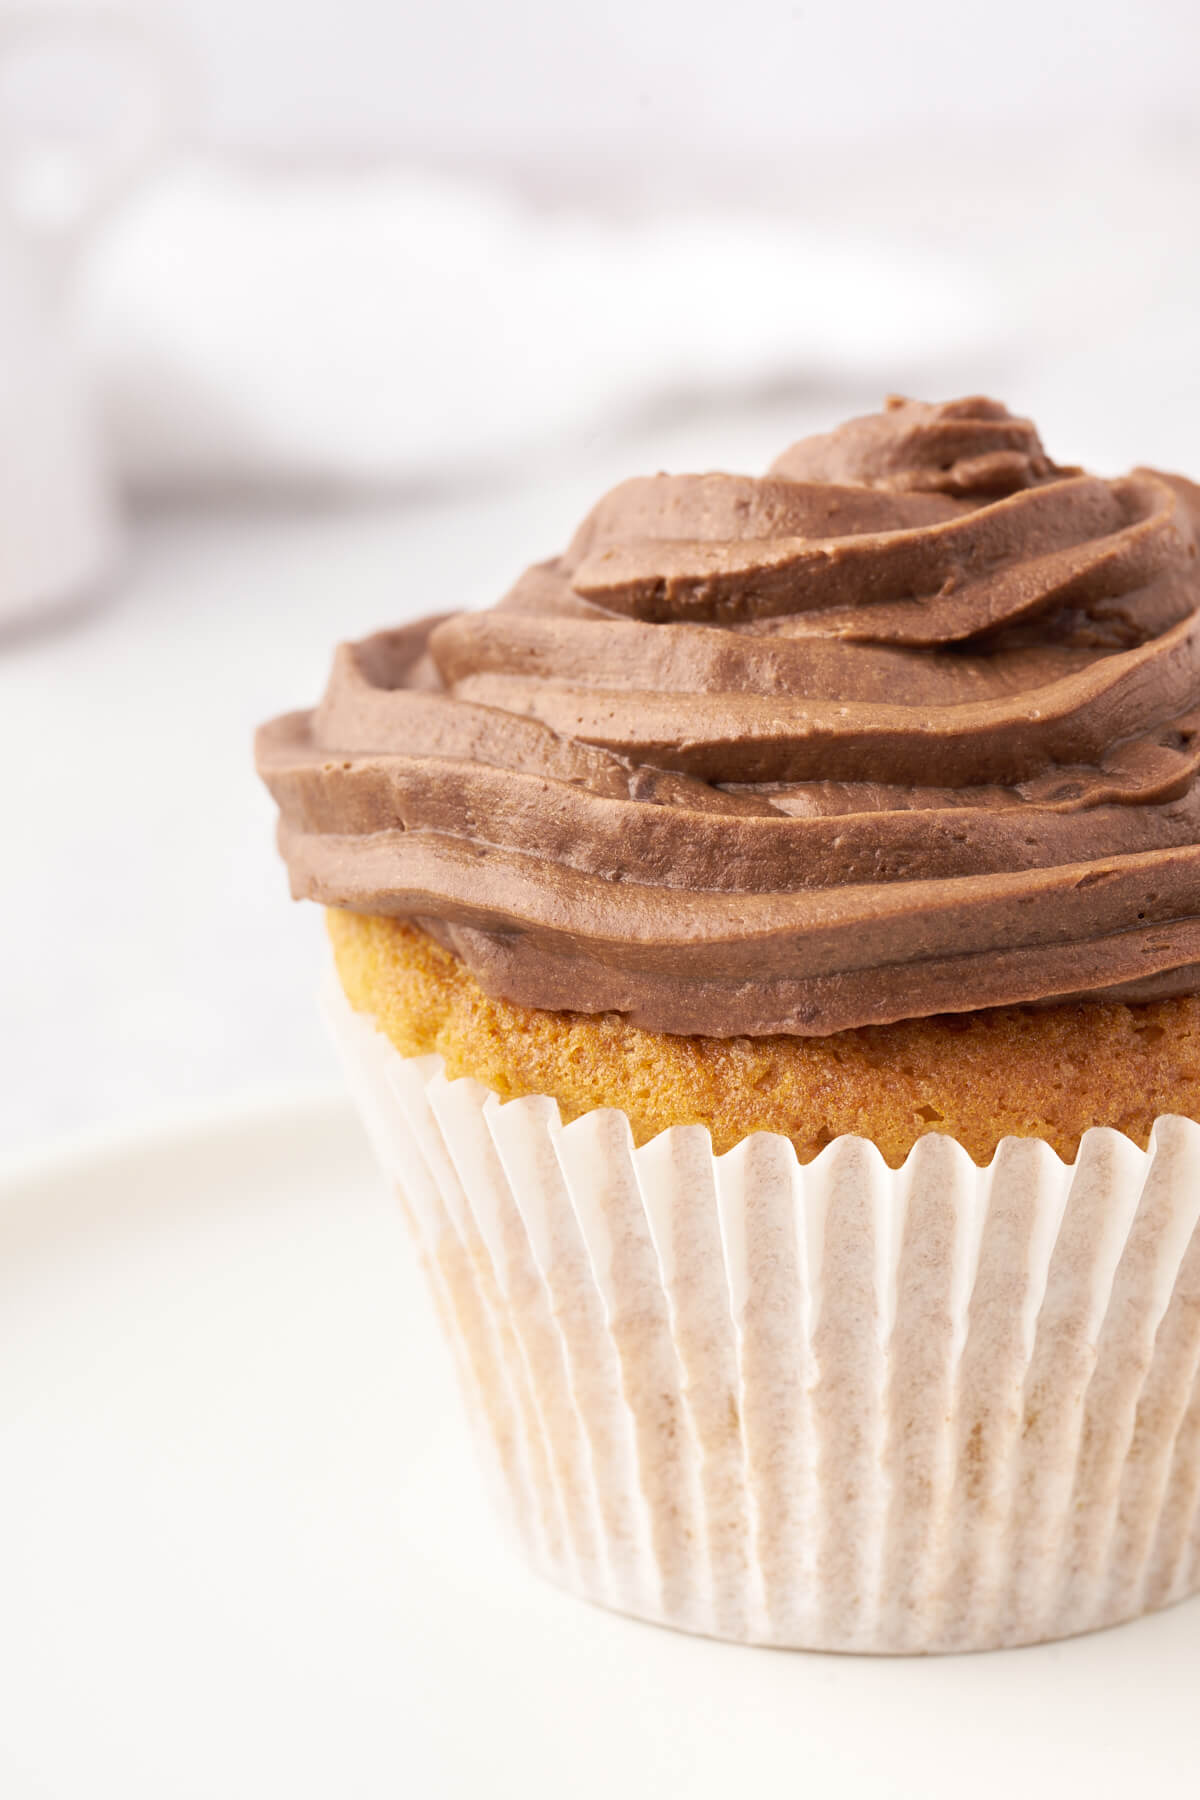 A vanilla cupcake frosted with swirled Nutella frosting.